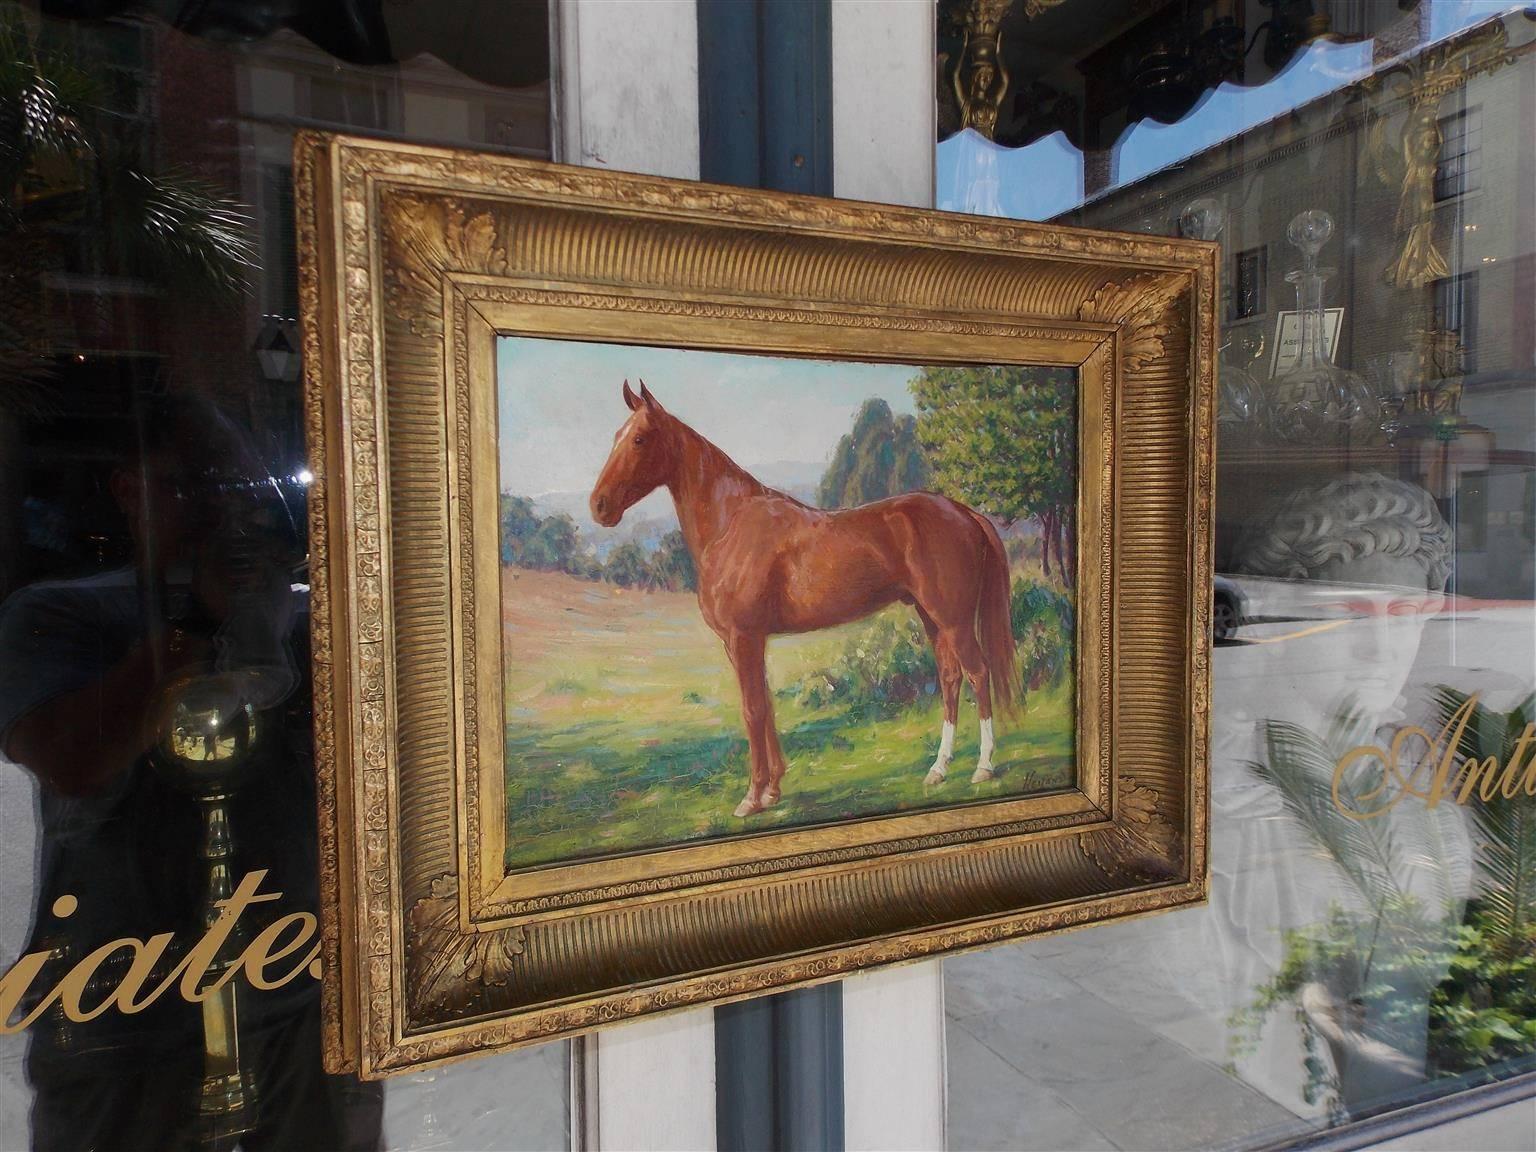 American oil on board portrait of horse landscape in the original gold gilt floral frame. Signed James Weiland, (1872-1968) New York, Early 20th century.

Weiland studied at the Royal Academy in Munich, Colarossi in Paris, the Art Students league